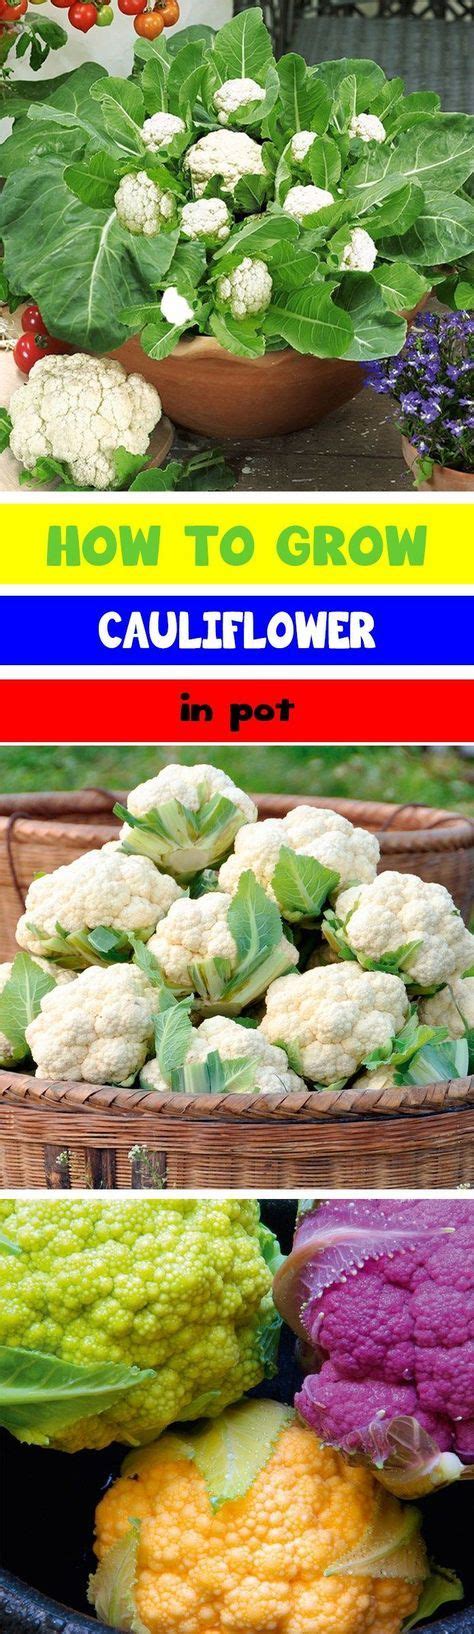 How To Grow Cauliflower In Pot Growing Cauliflower In A Container How